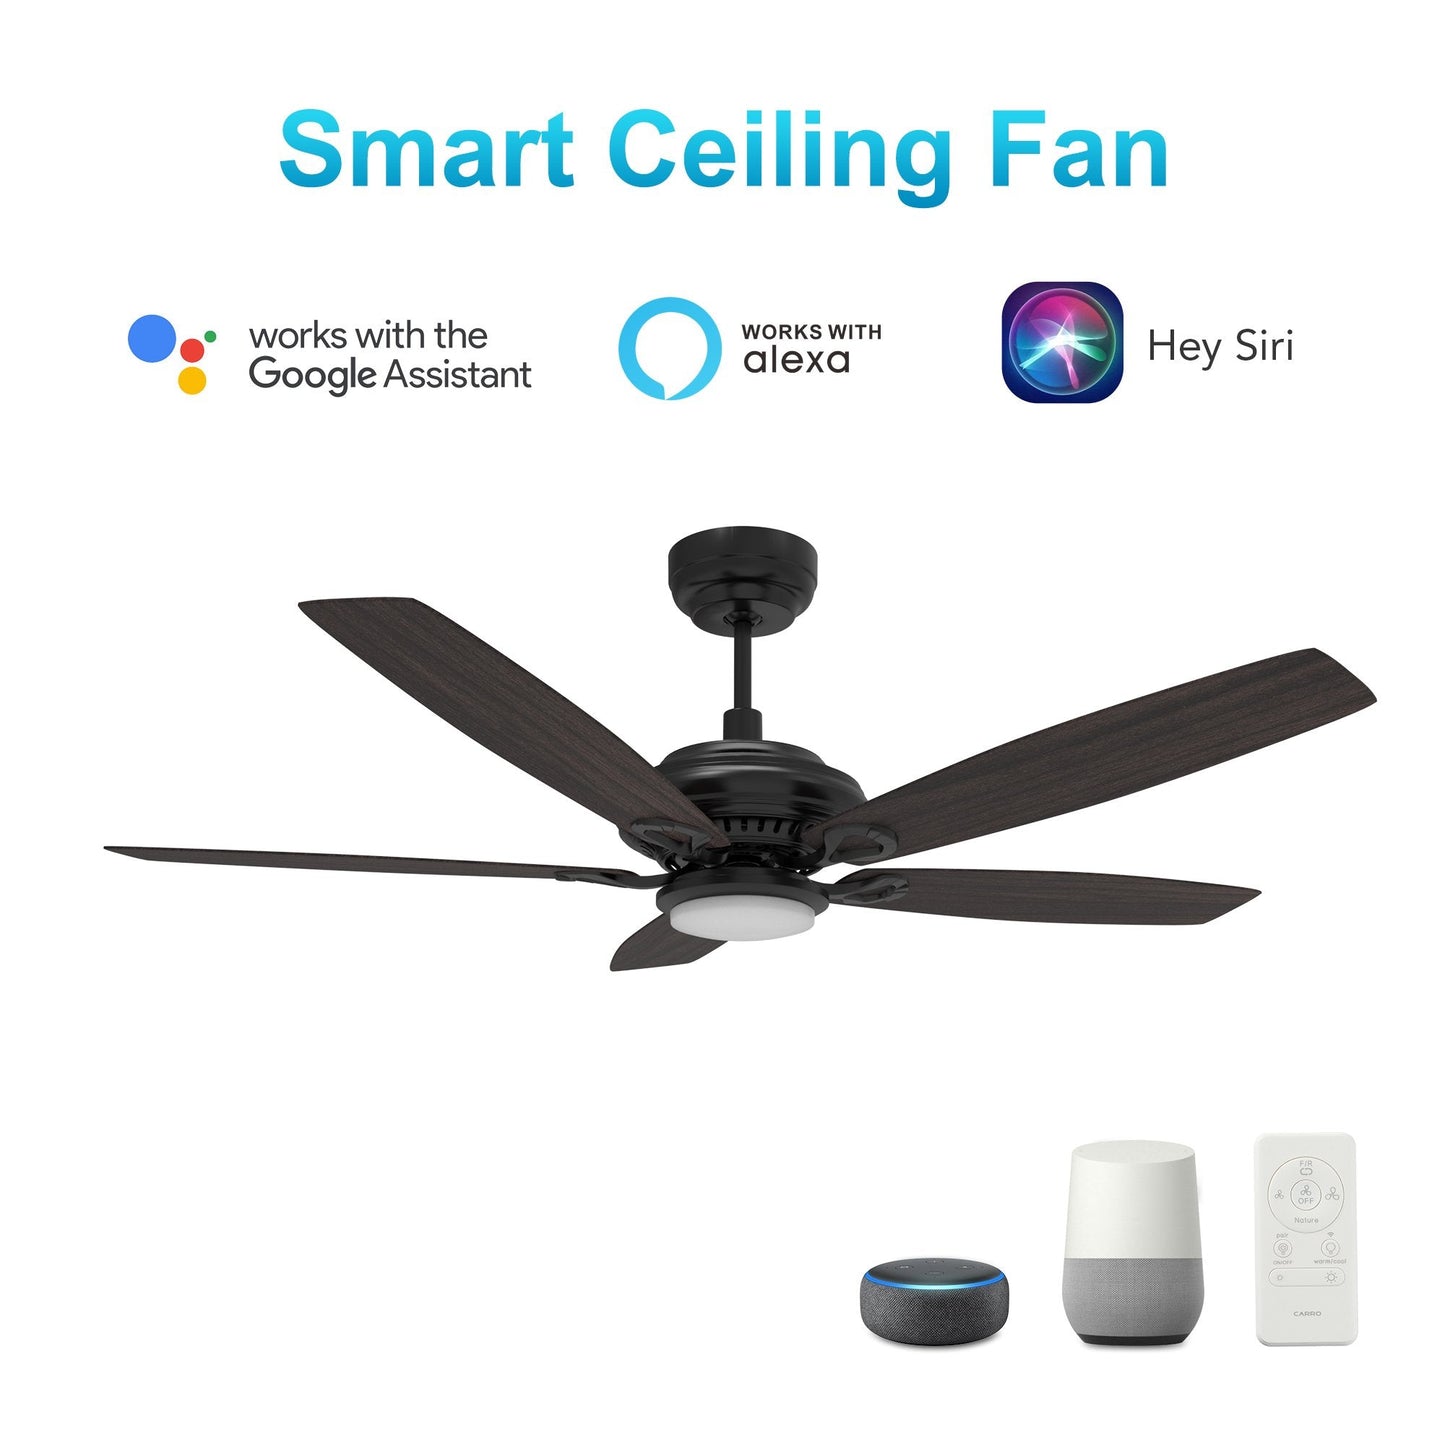 Somerset 52'' Best Smart Ceiling Fan with Remote, Light Kit Included, Works with Google Assistant and Amazon Alexa,Siri Shortcut